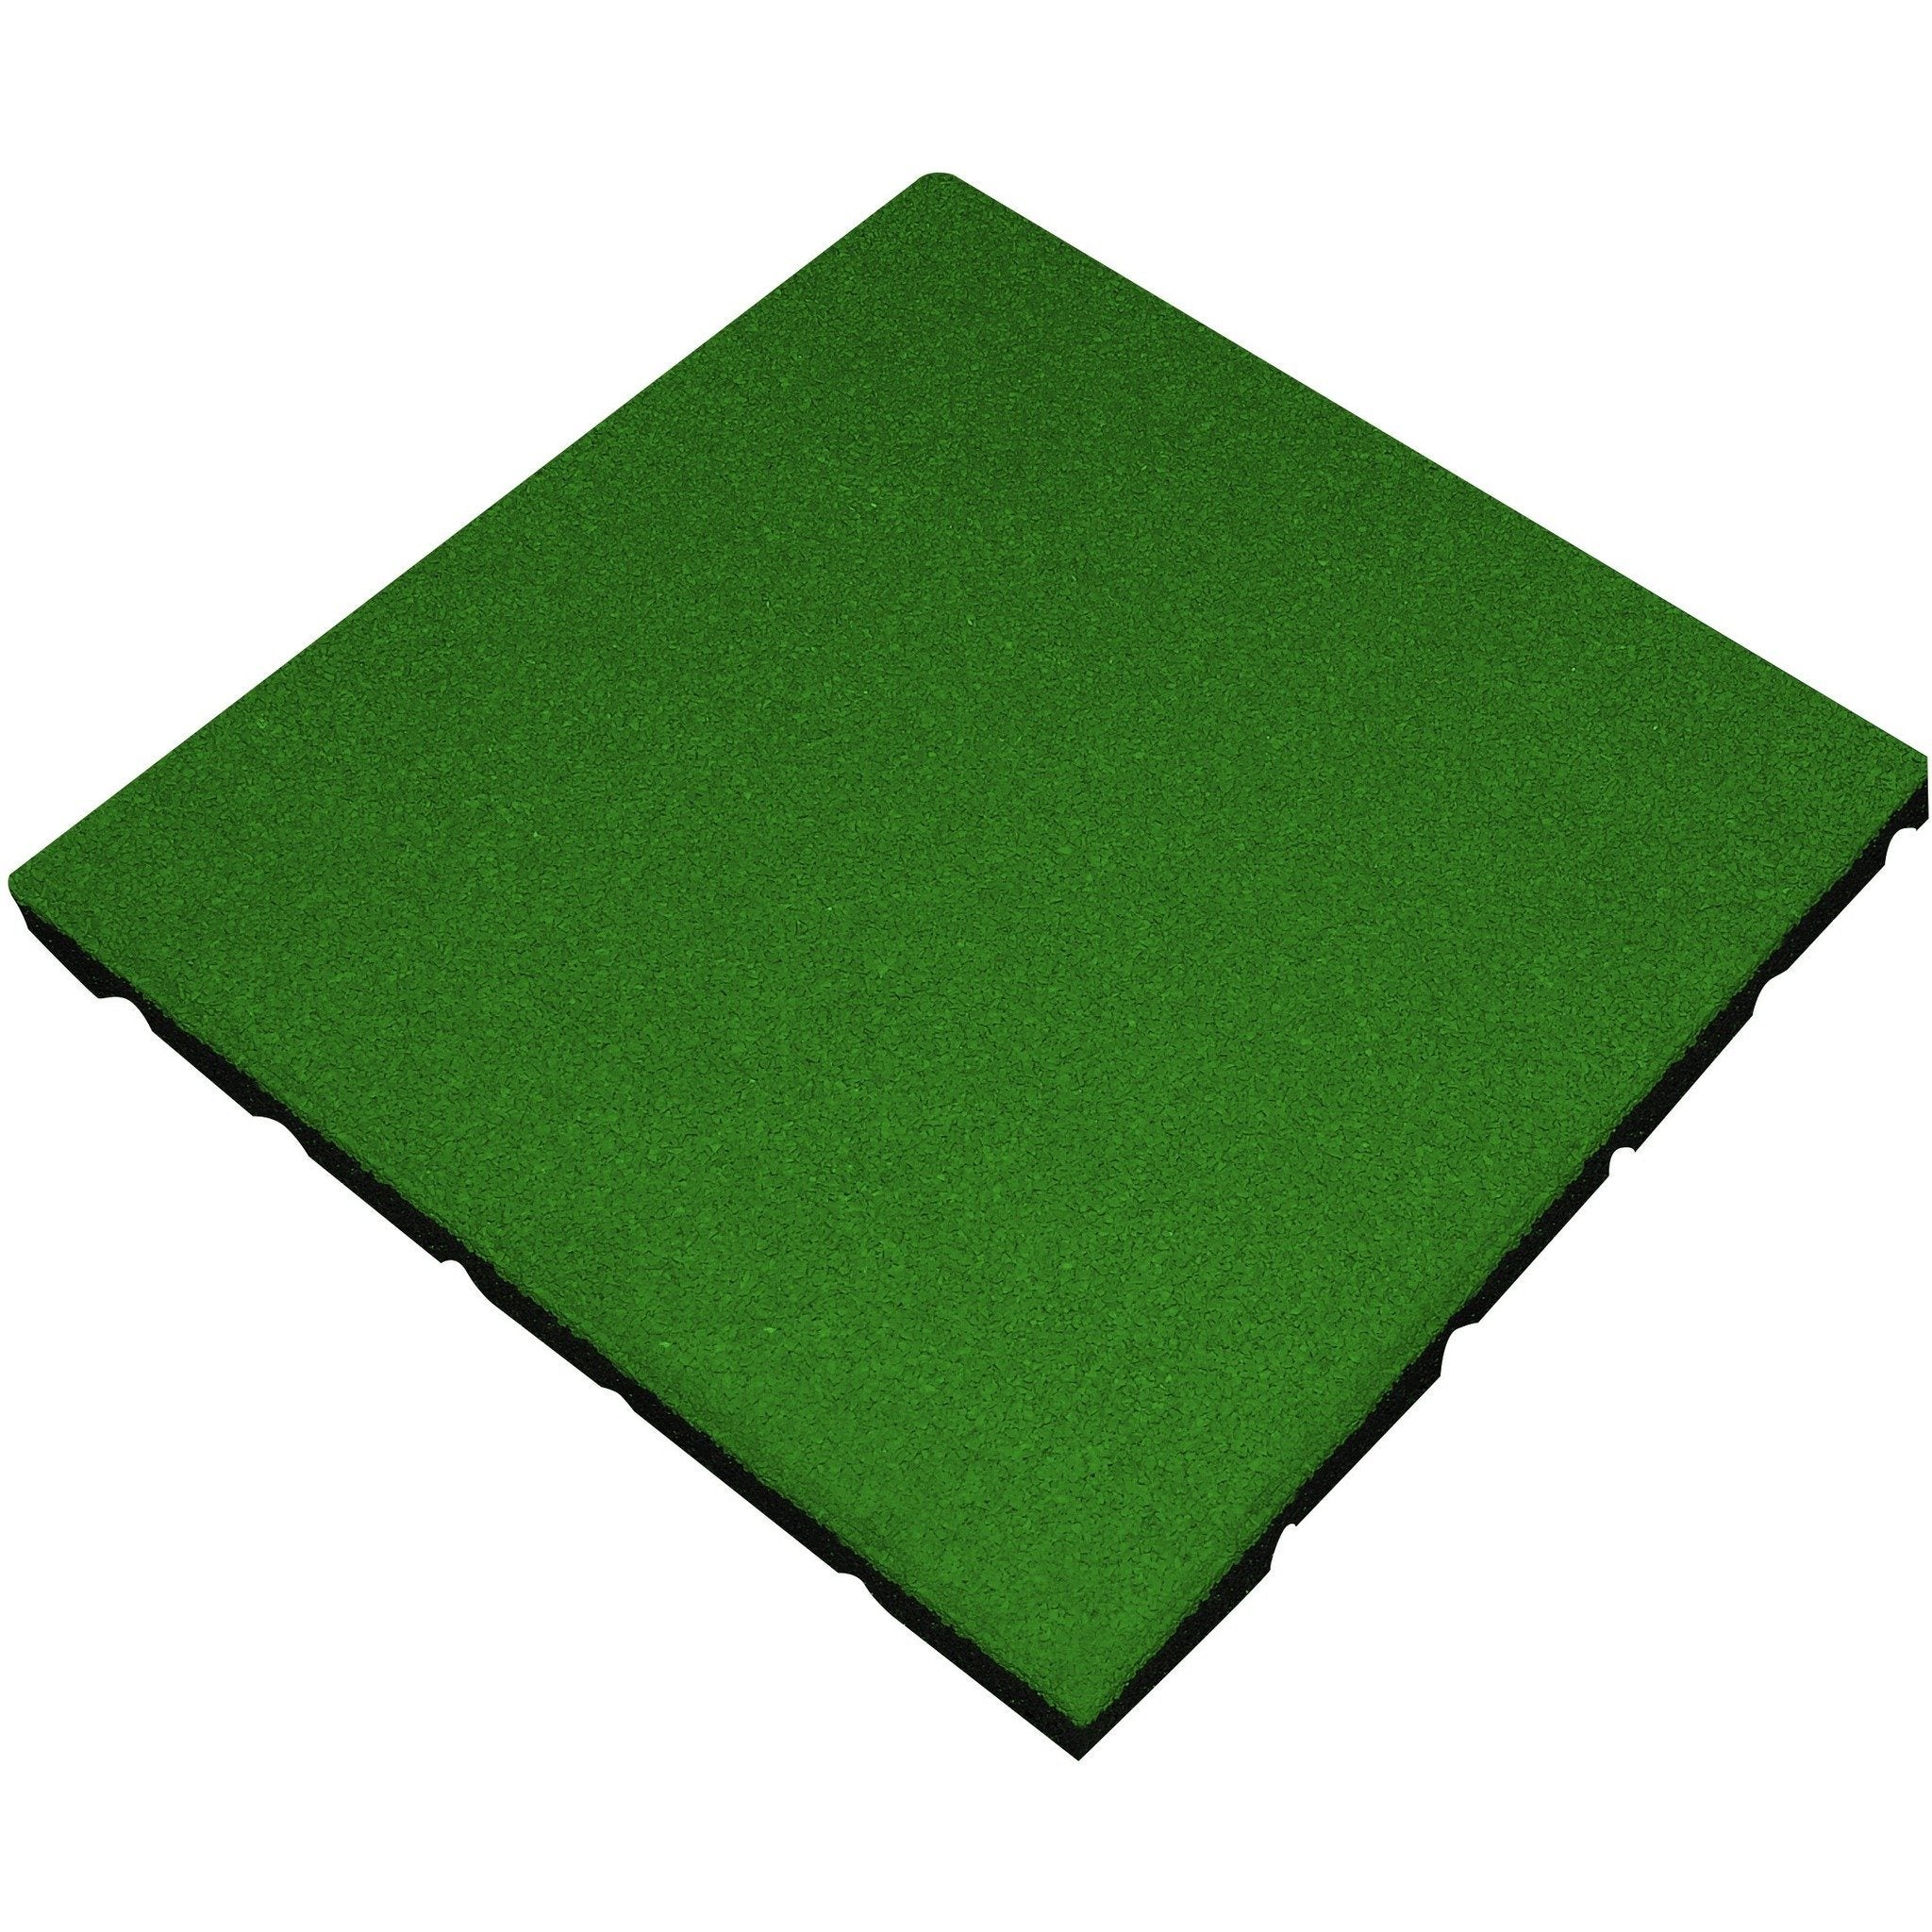 Cannons UK 50cm x 50cm x 40mm Rubber Playground Tiles (bulk discounts available) - Cannons UK